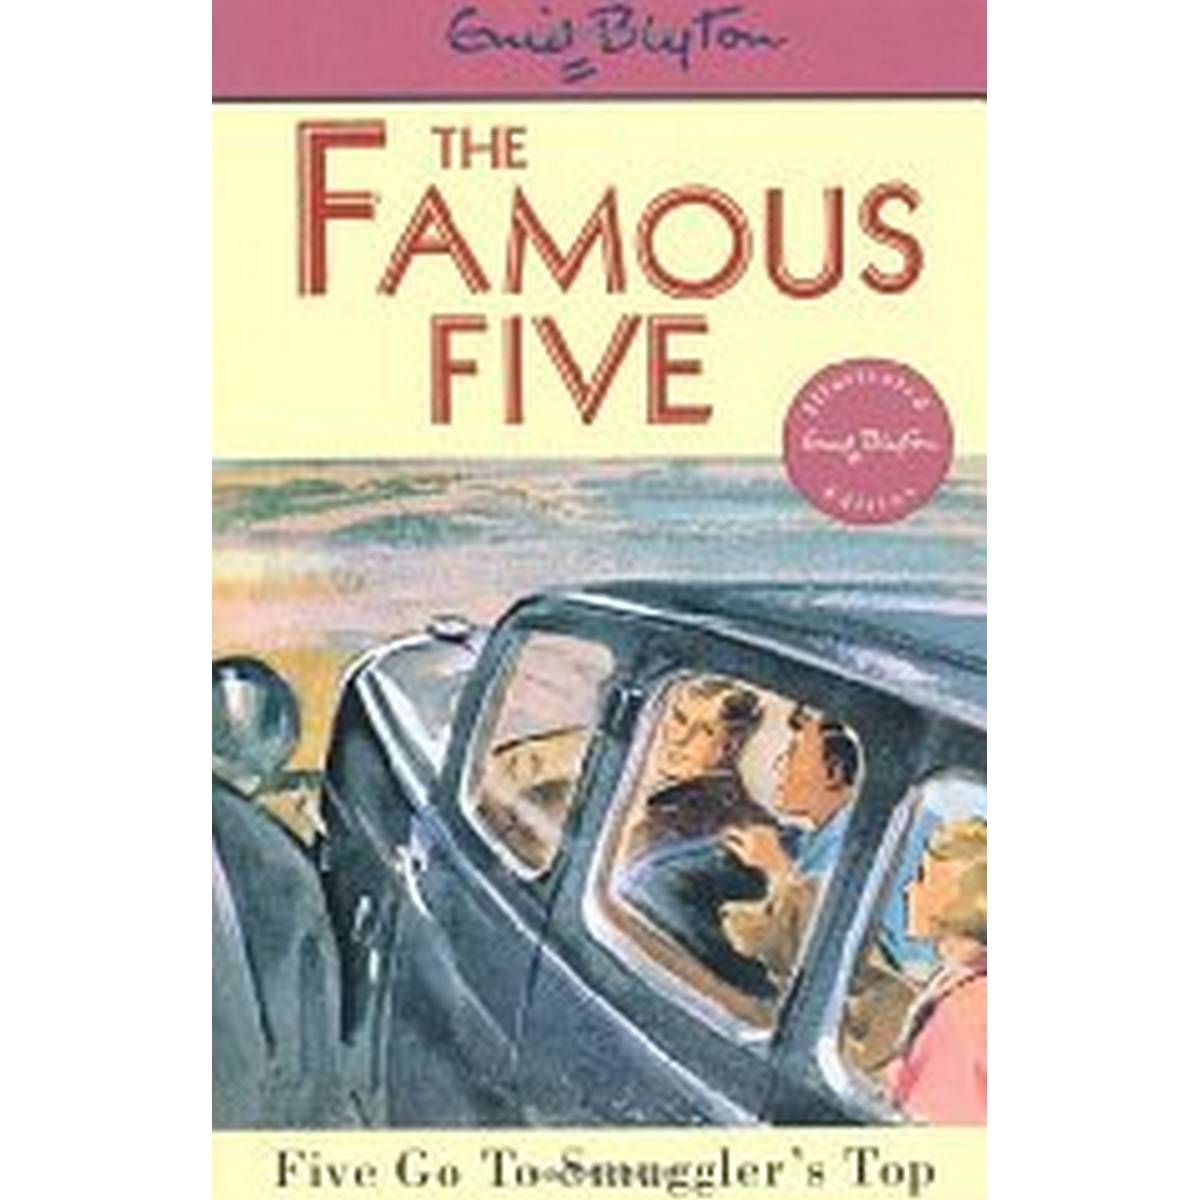 Five Go to Smuggler's Top (Famous Five)